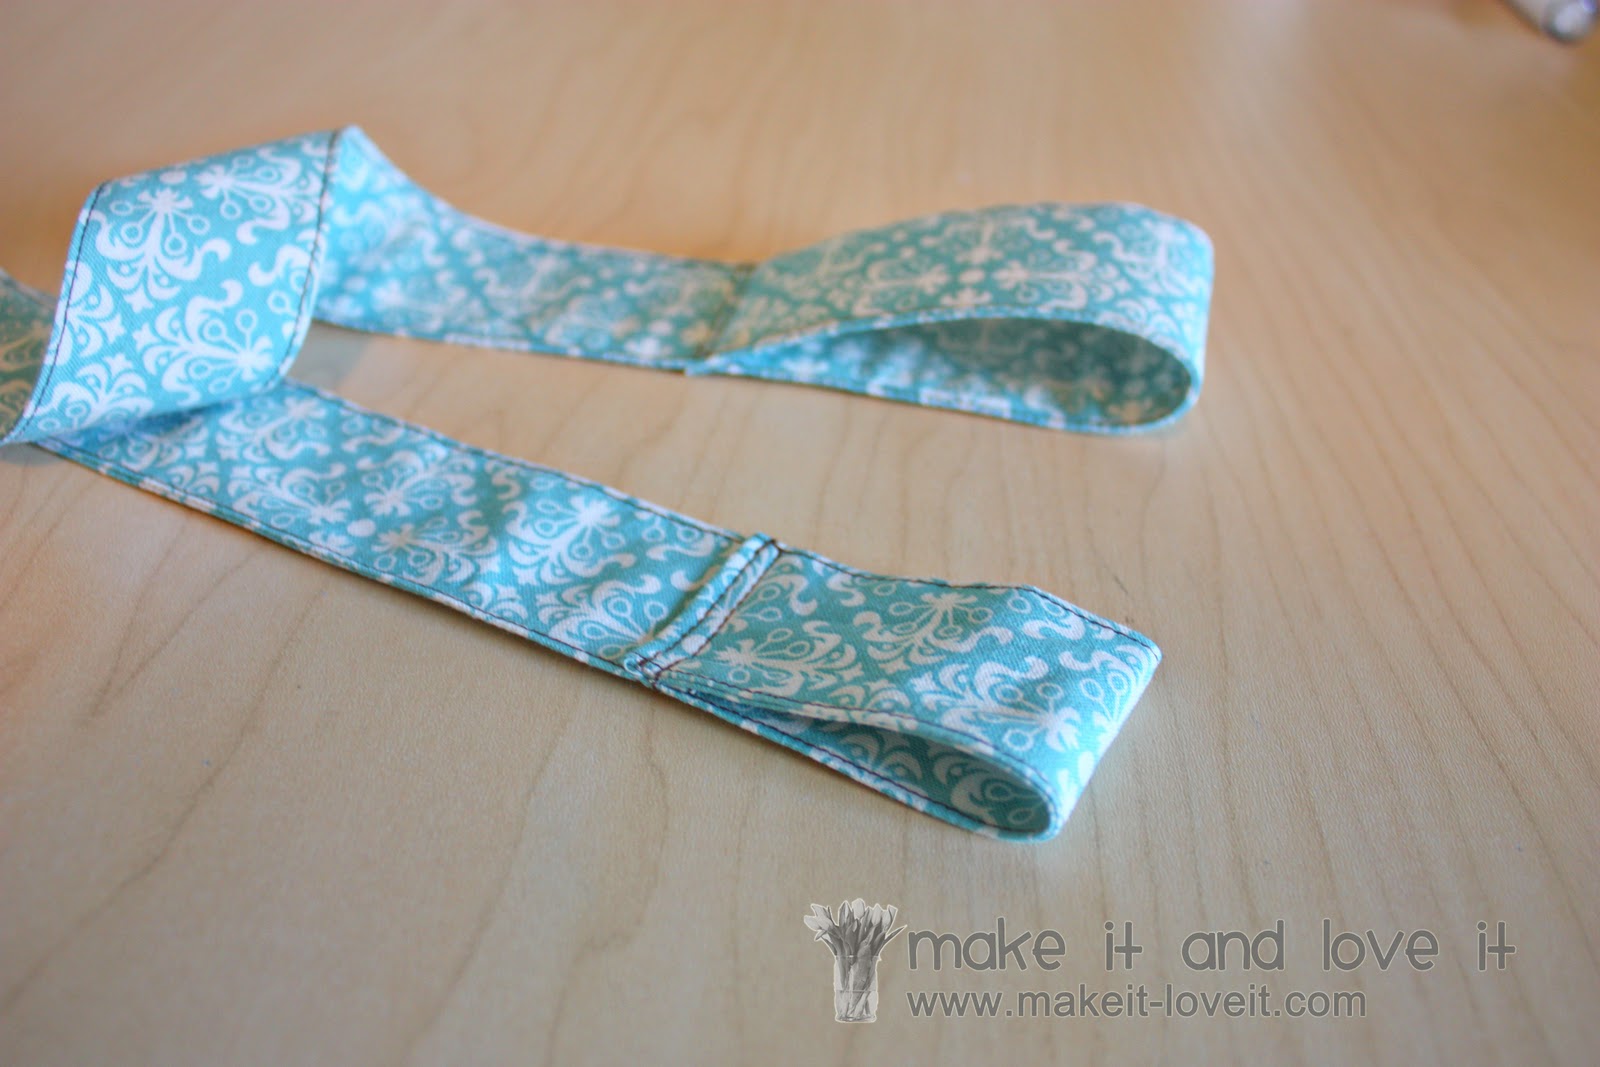 Toddler Bag Handle | Make It and Love It